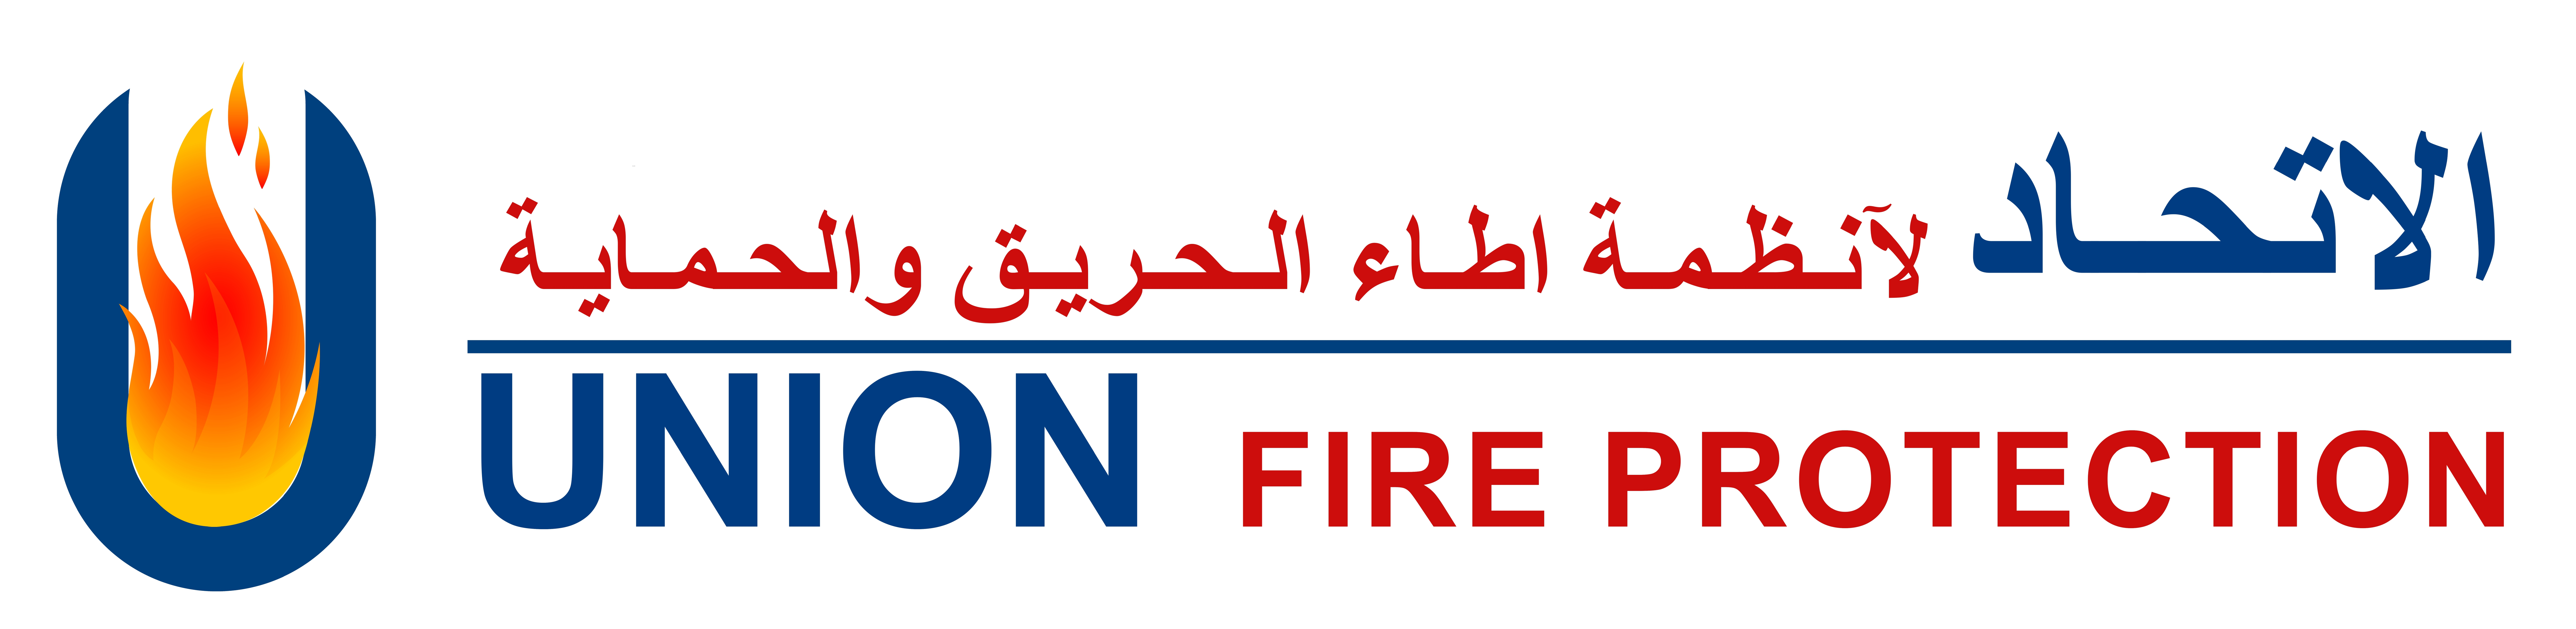 Union Fire Protection